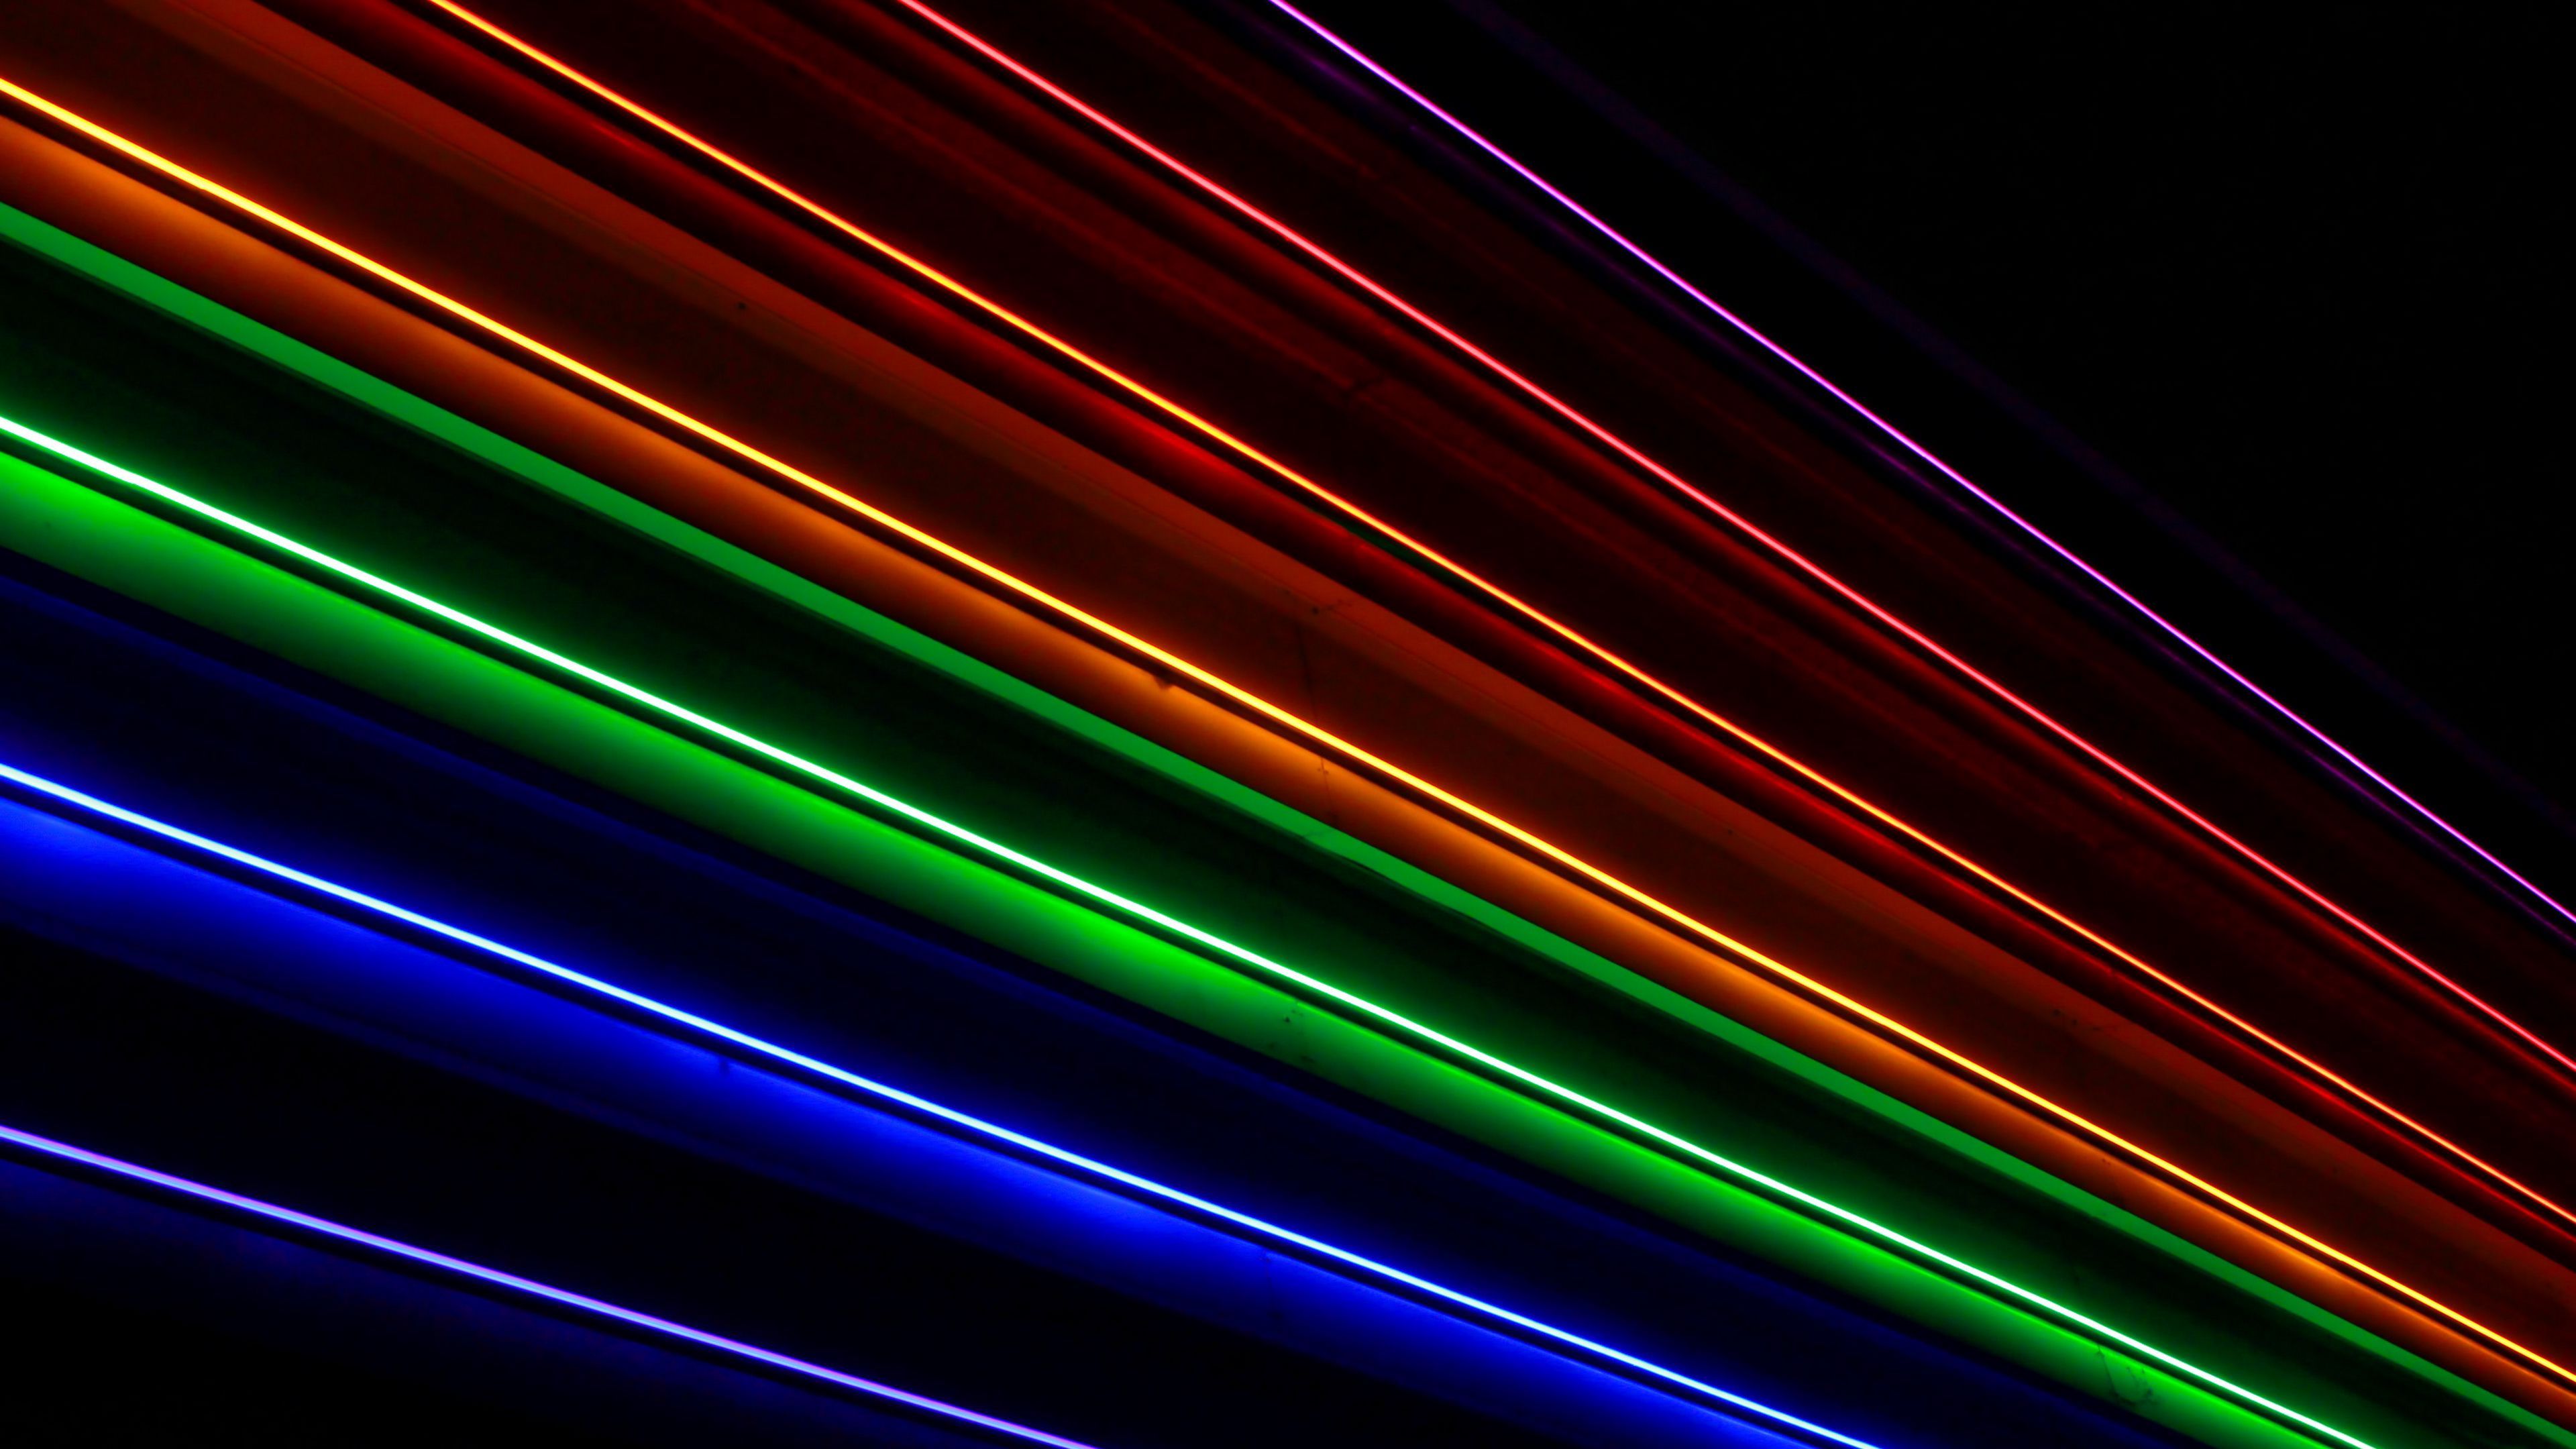 Wallpaper lights lights background colors abstract rainbow background  neon neon images for desktop section абстракции  download